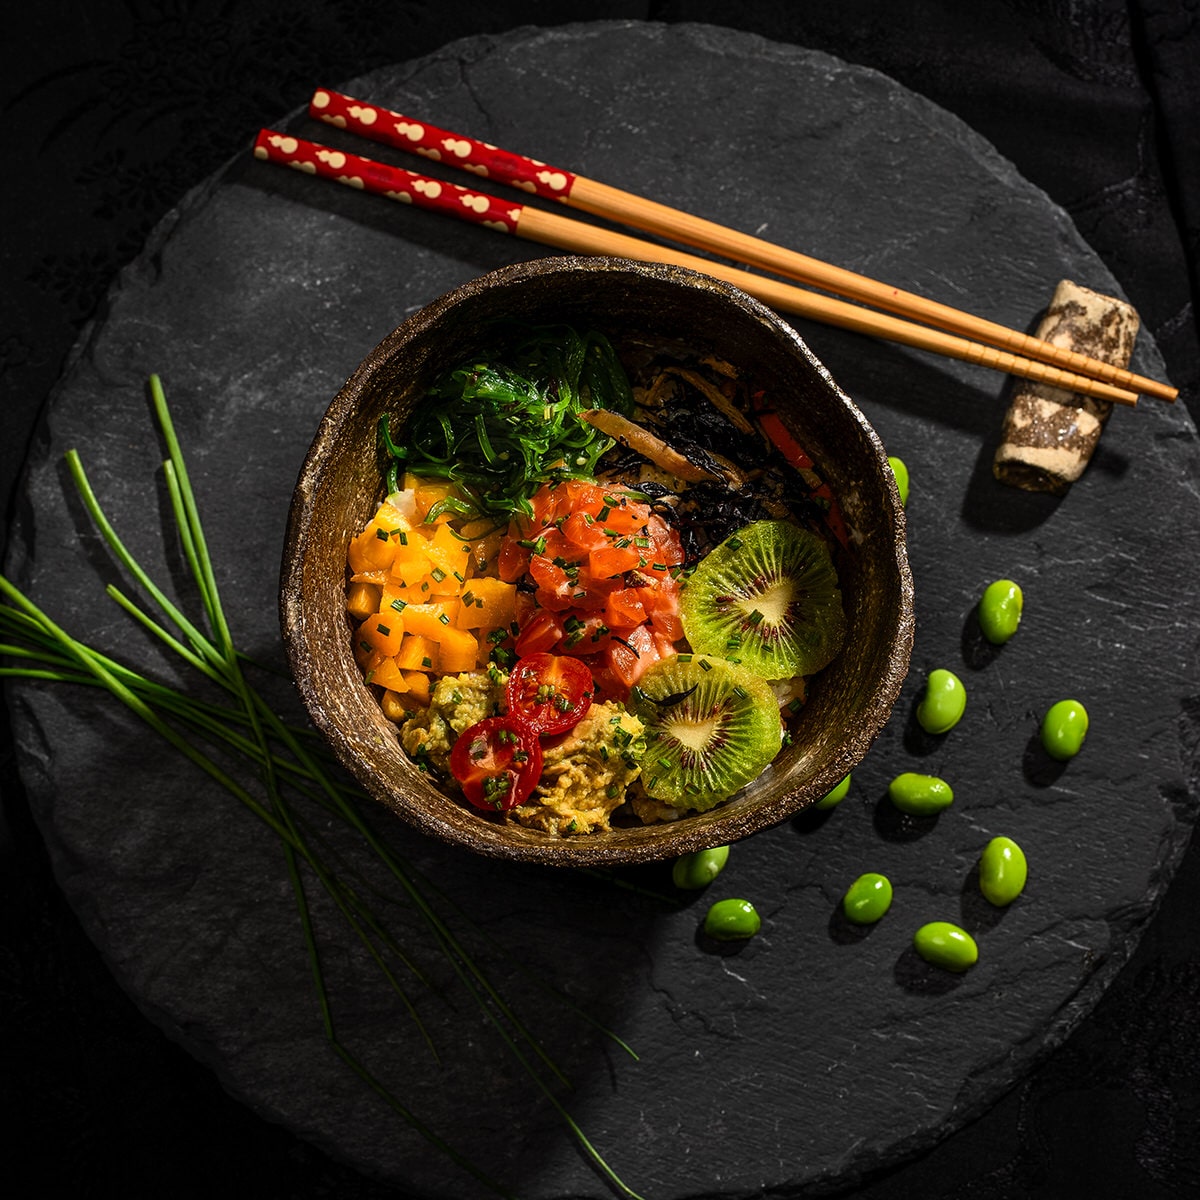 Poke bowl of rice with fish, vegetables and seaweed